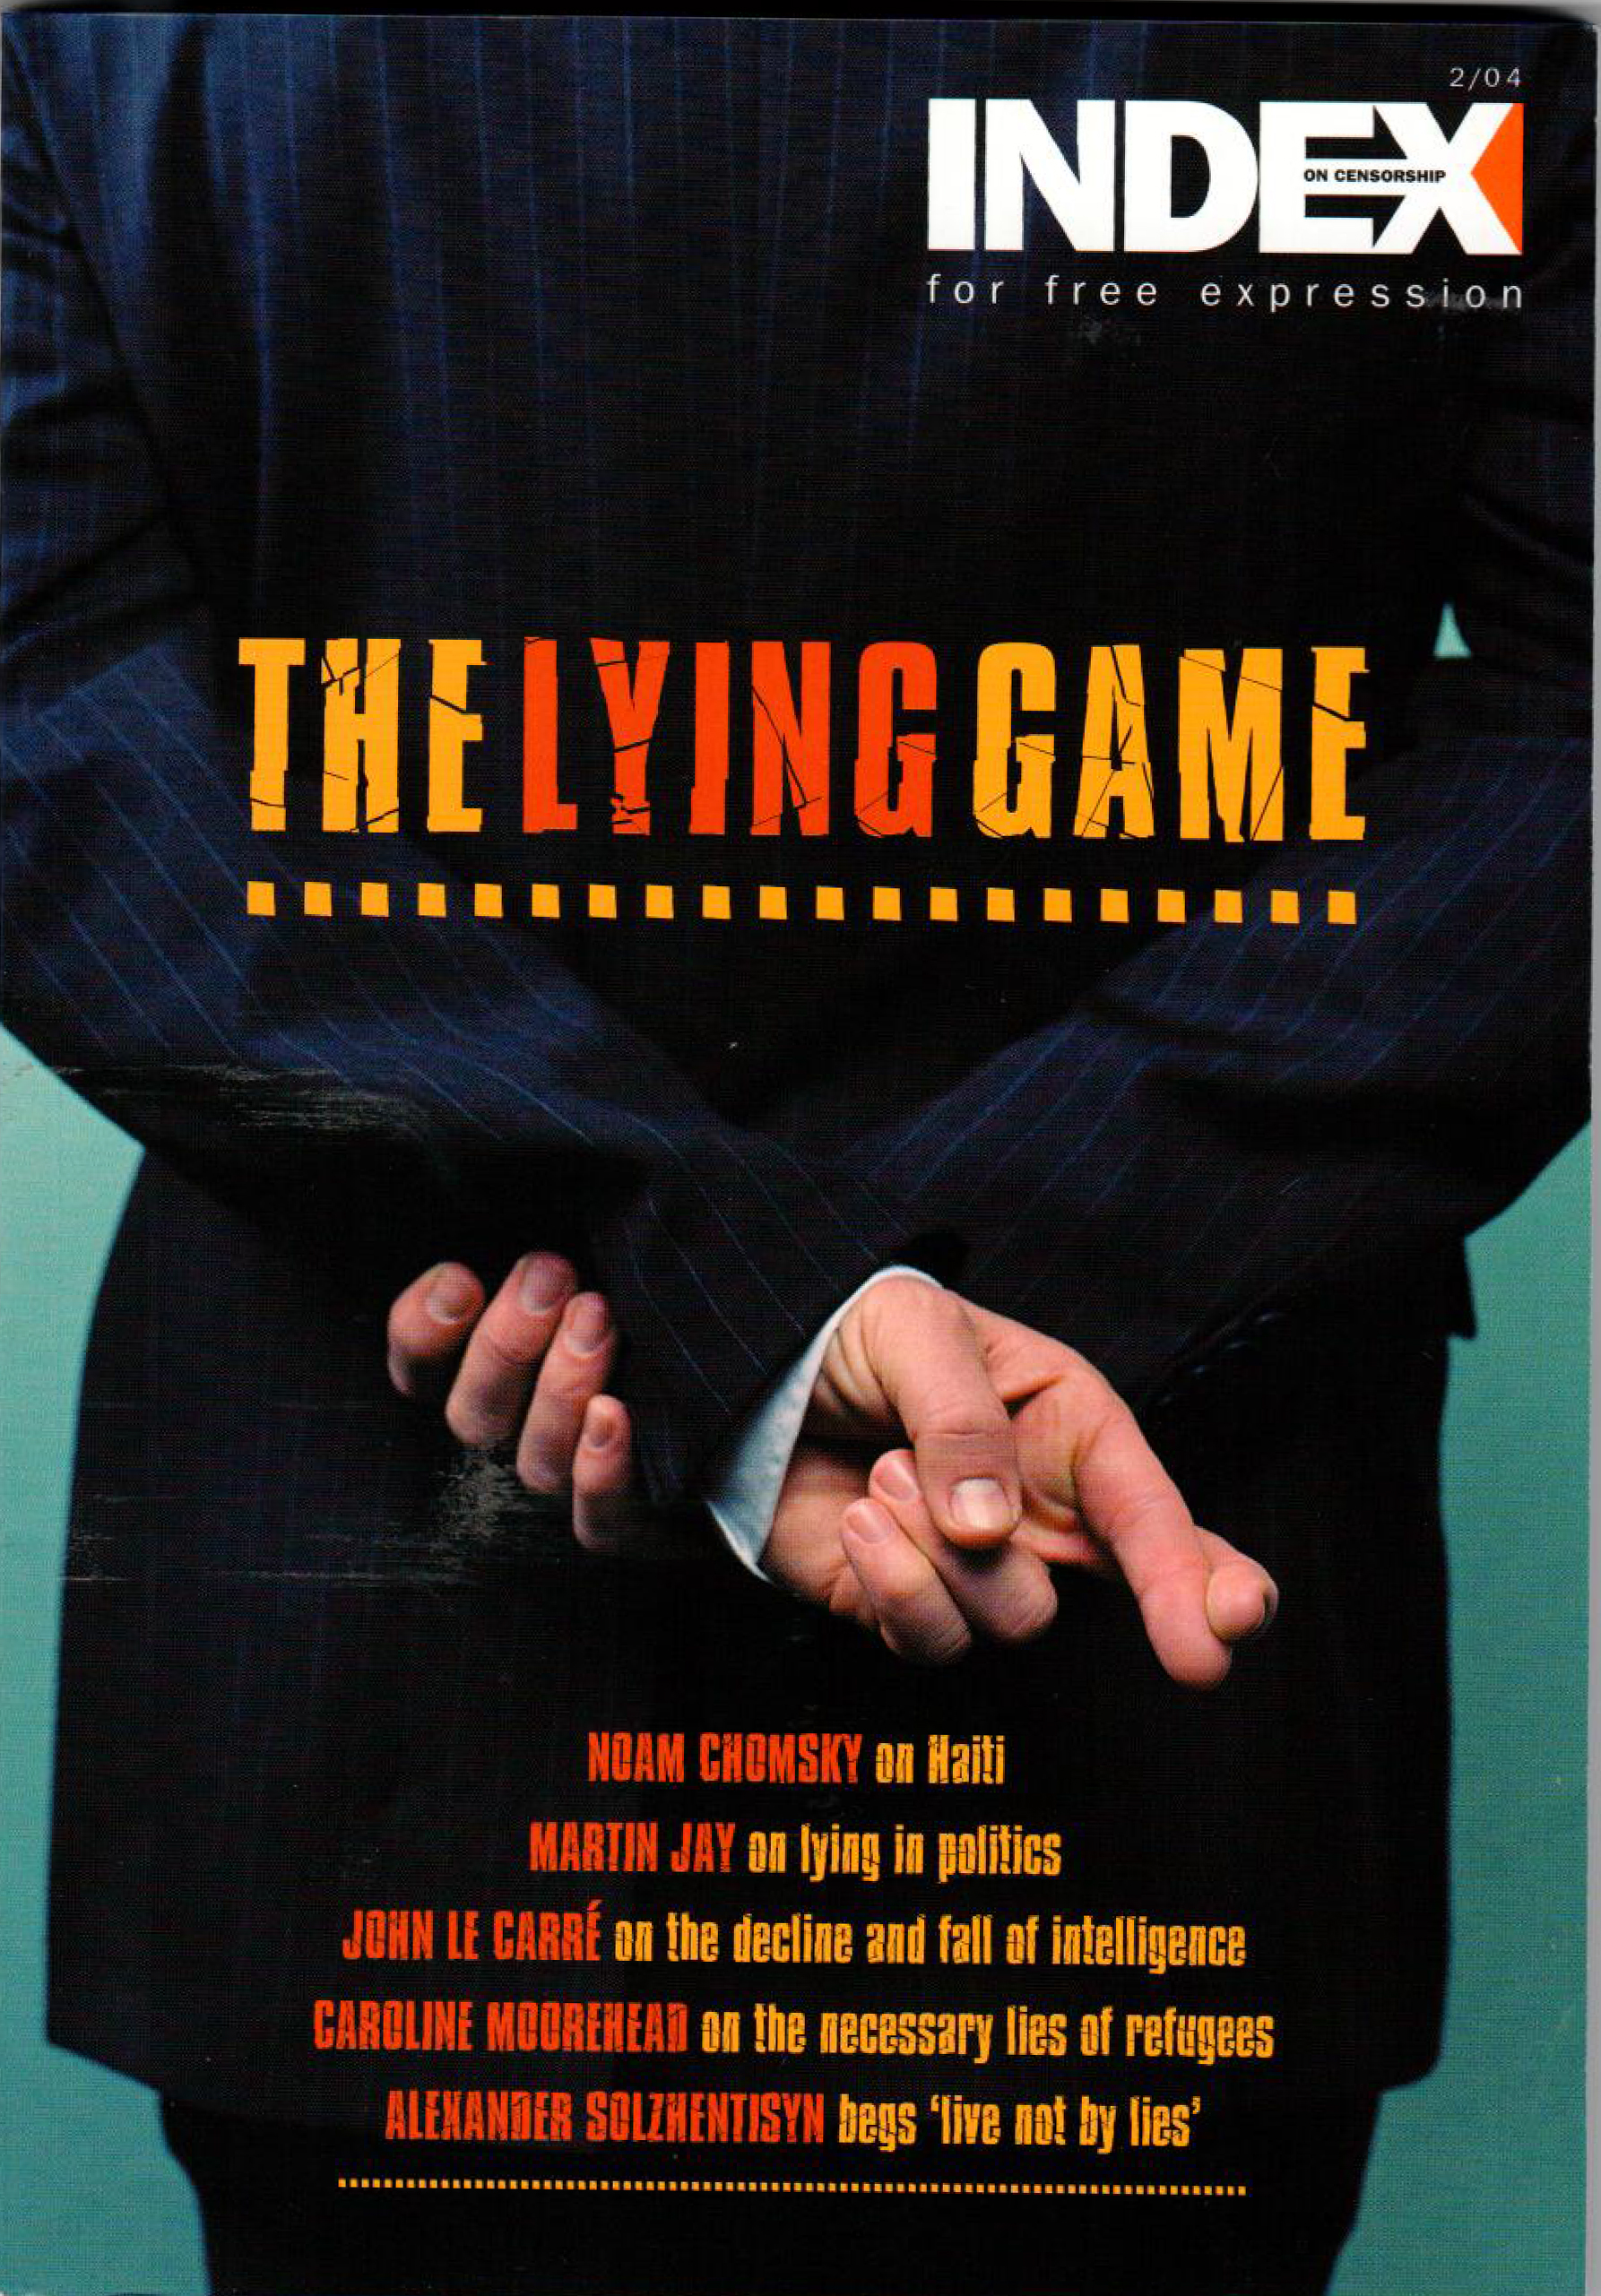 The lying game, the summer 2004 issue of Index on Censorship magazine.